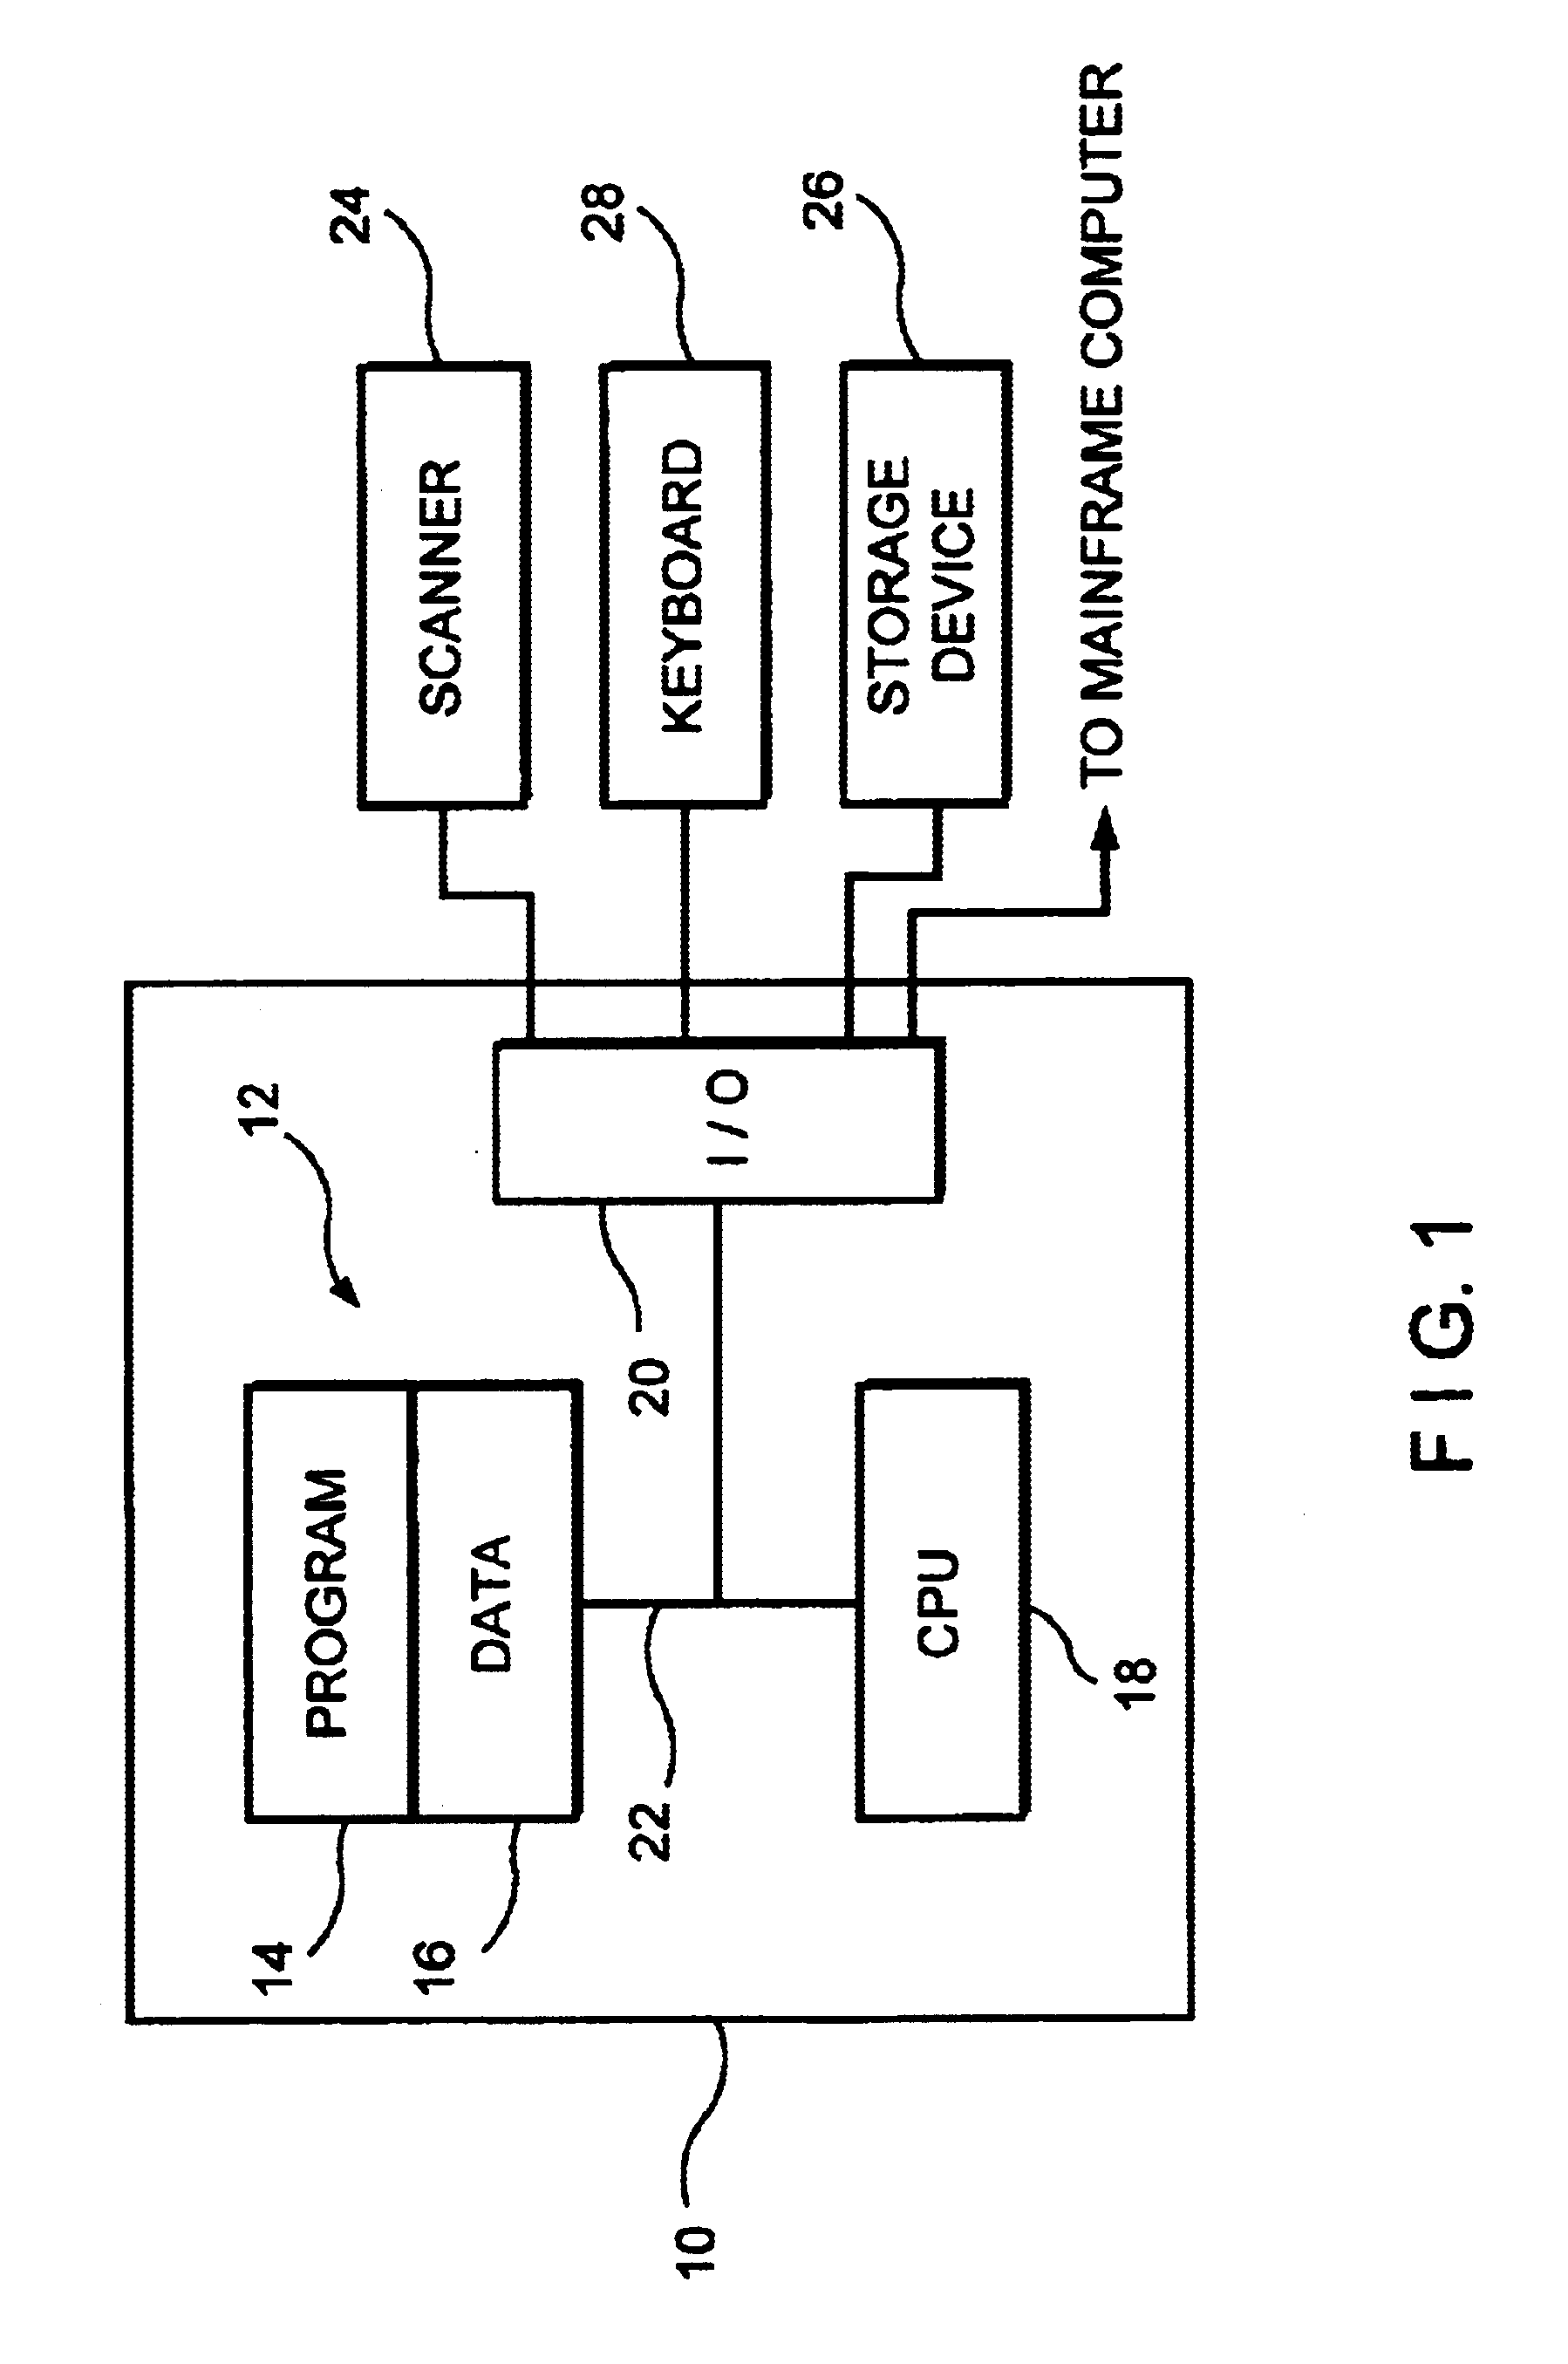 Multi-pass merge process for the check processing control system